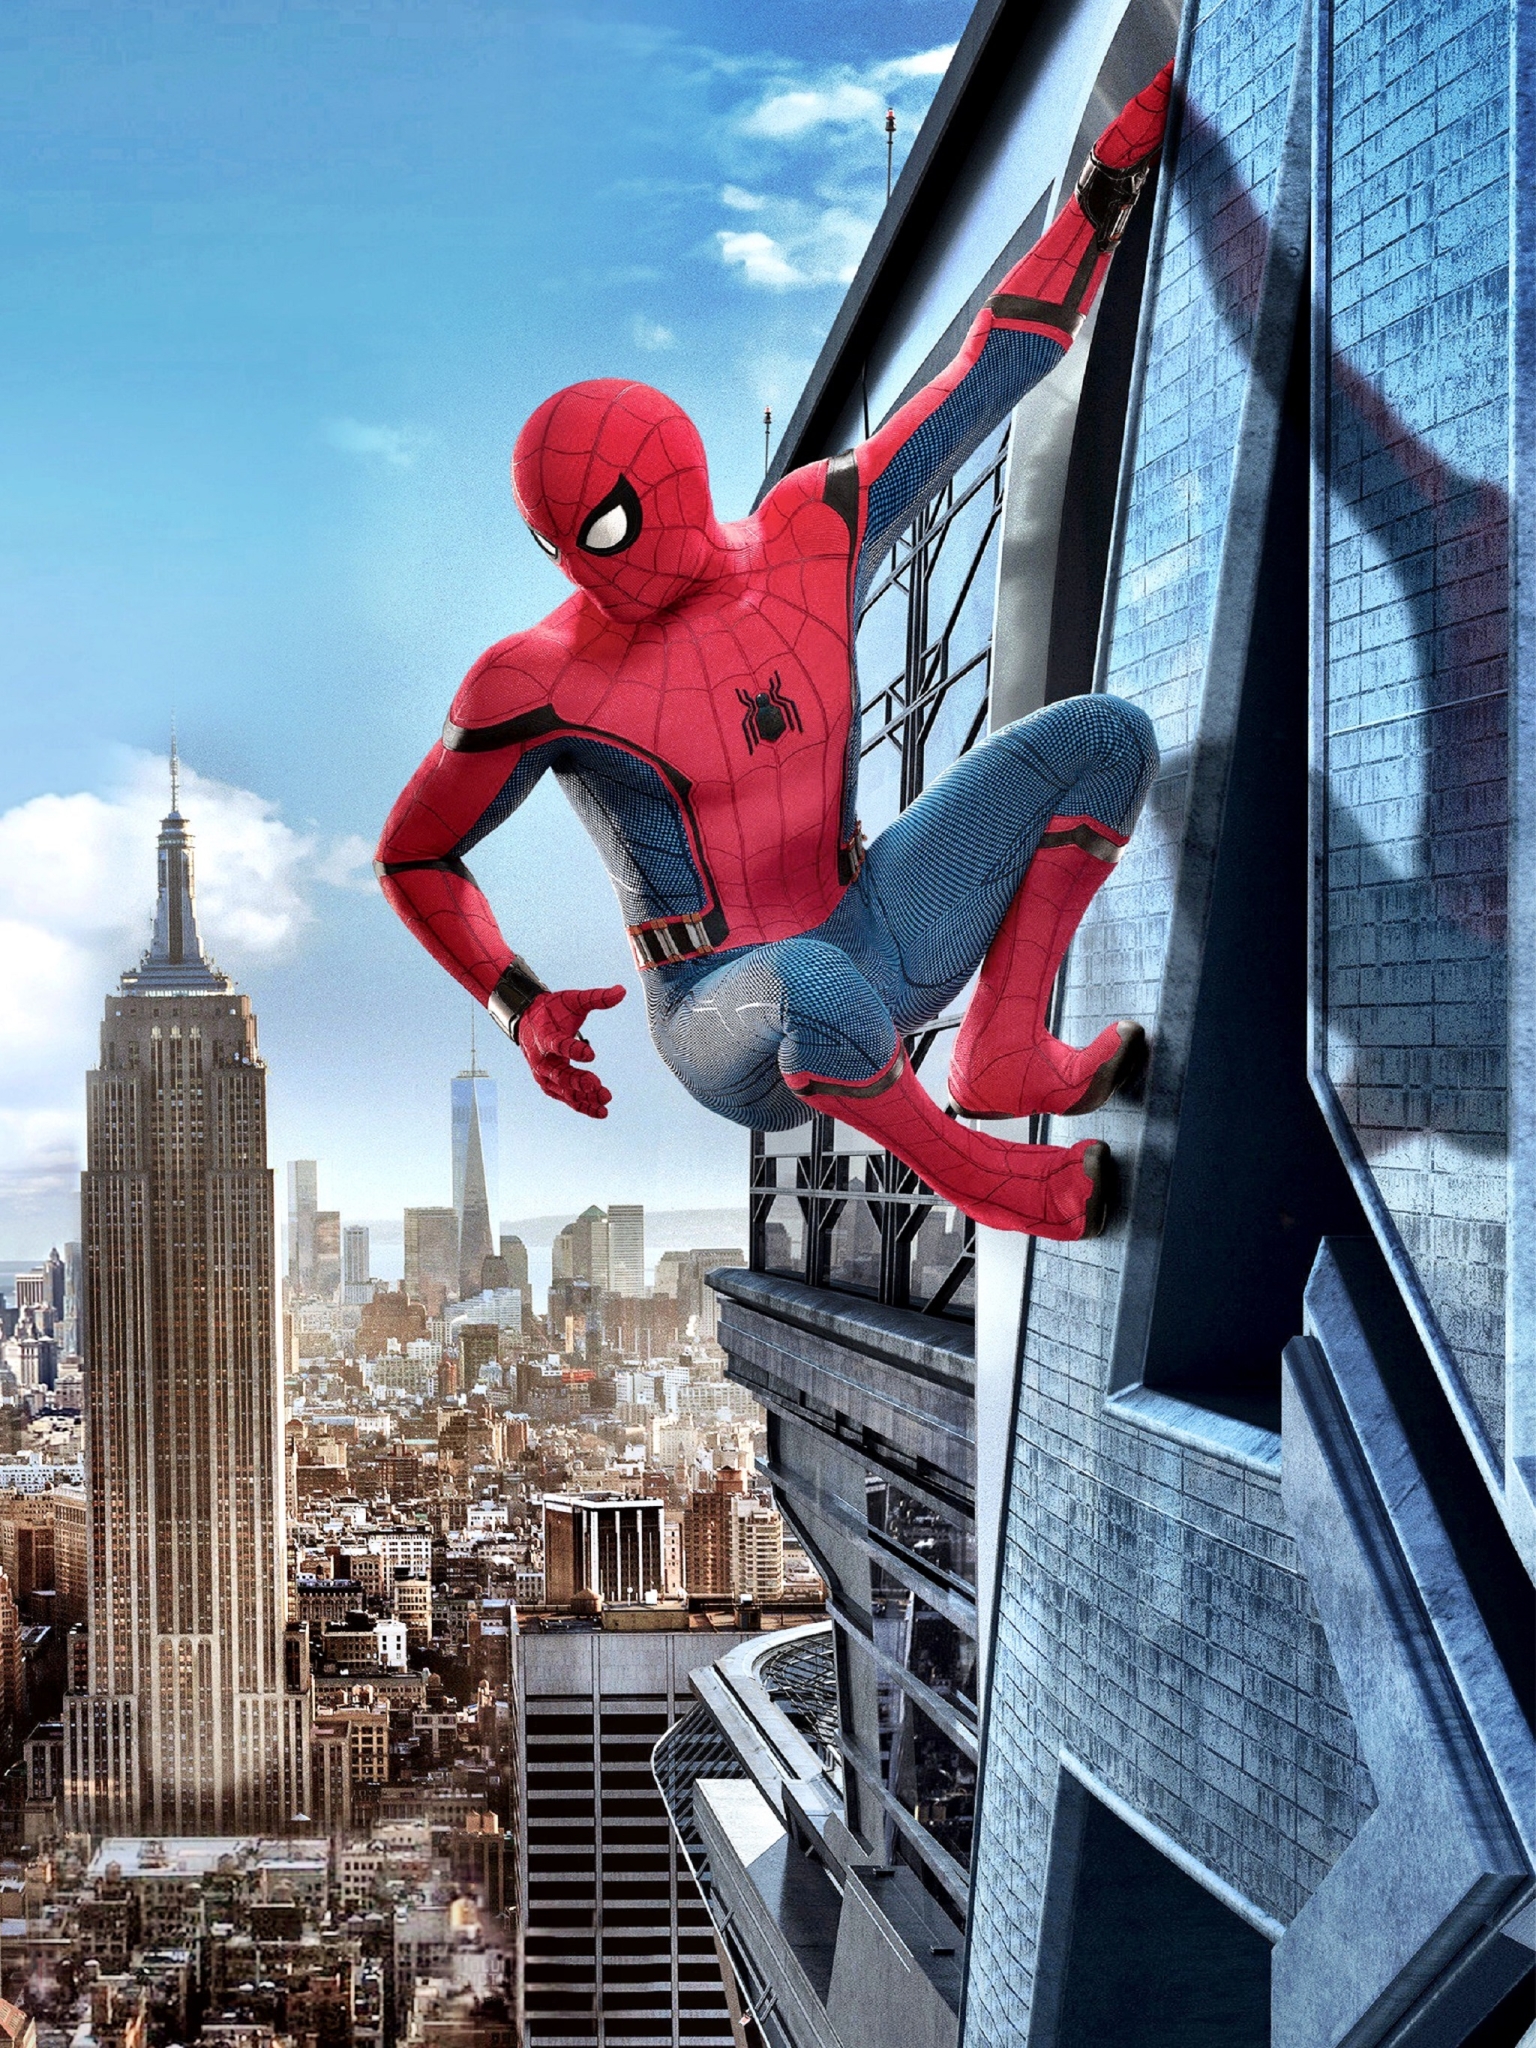 Spiderman Homecoming for Apple iPad Air 2 resolution